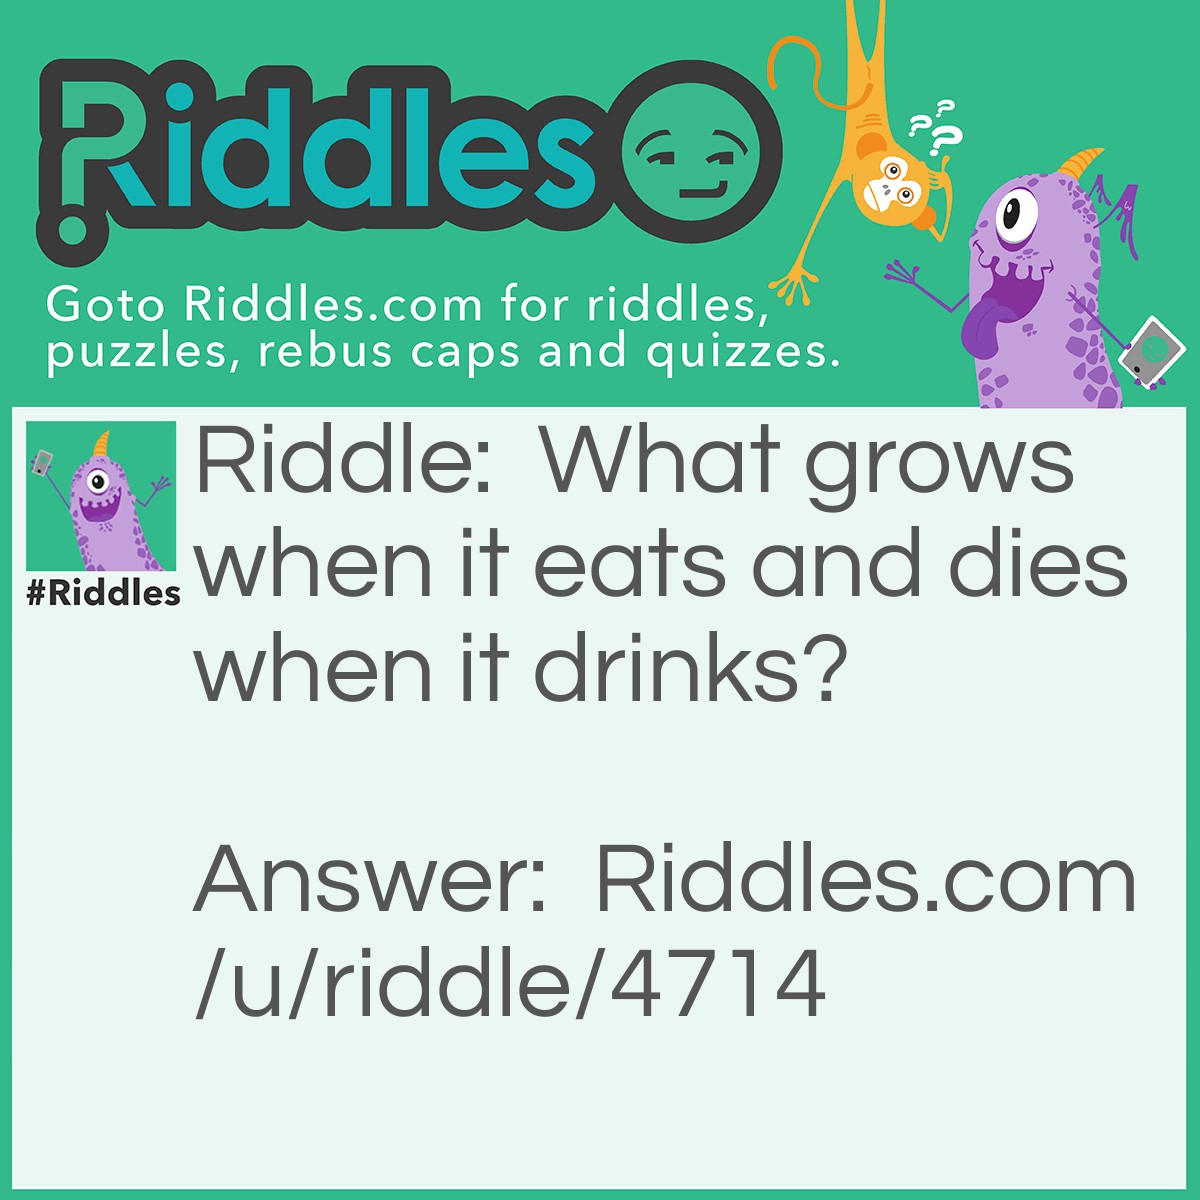 Riddle: What grows when it eats and dies when it drinks? Answer: FIRE.